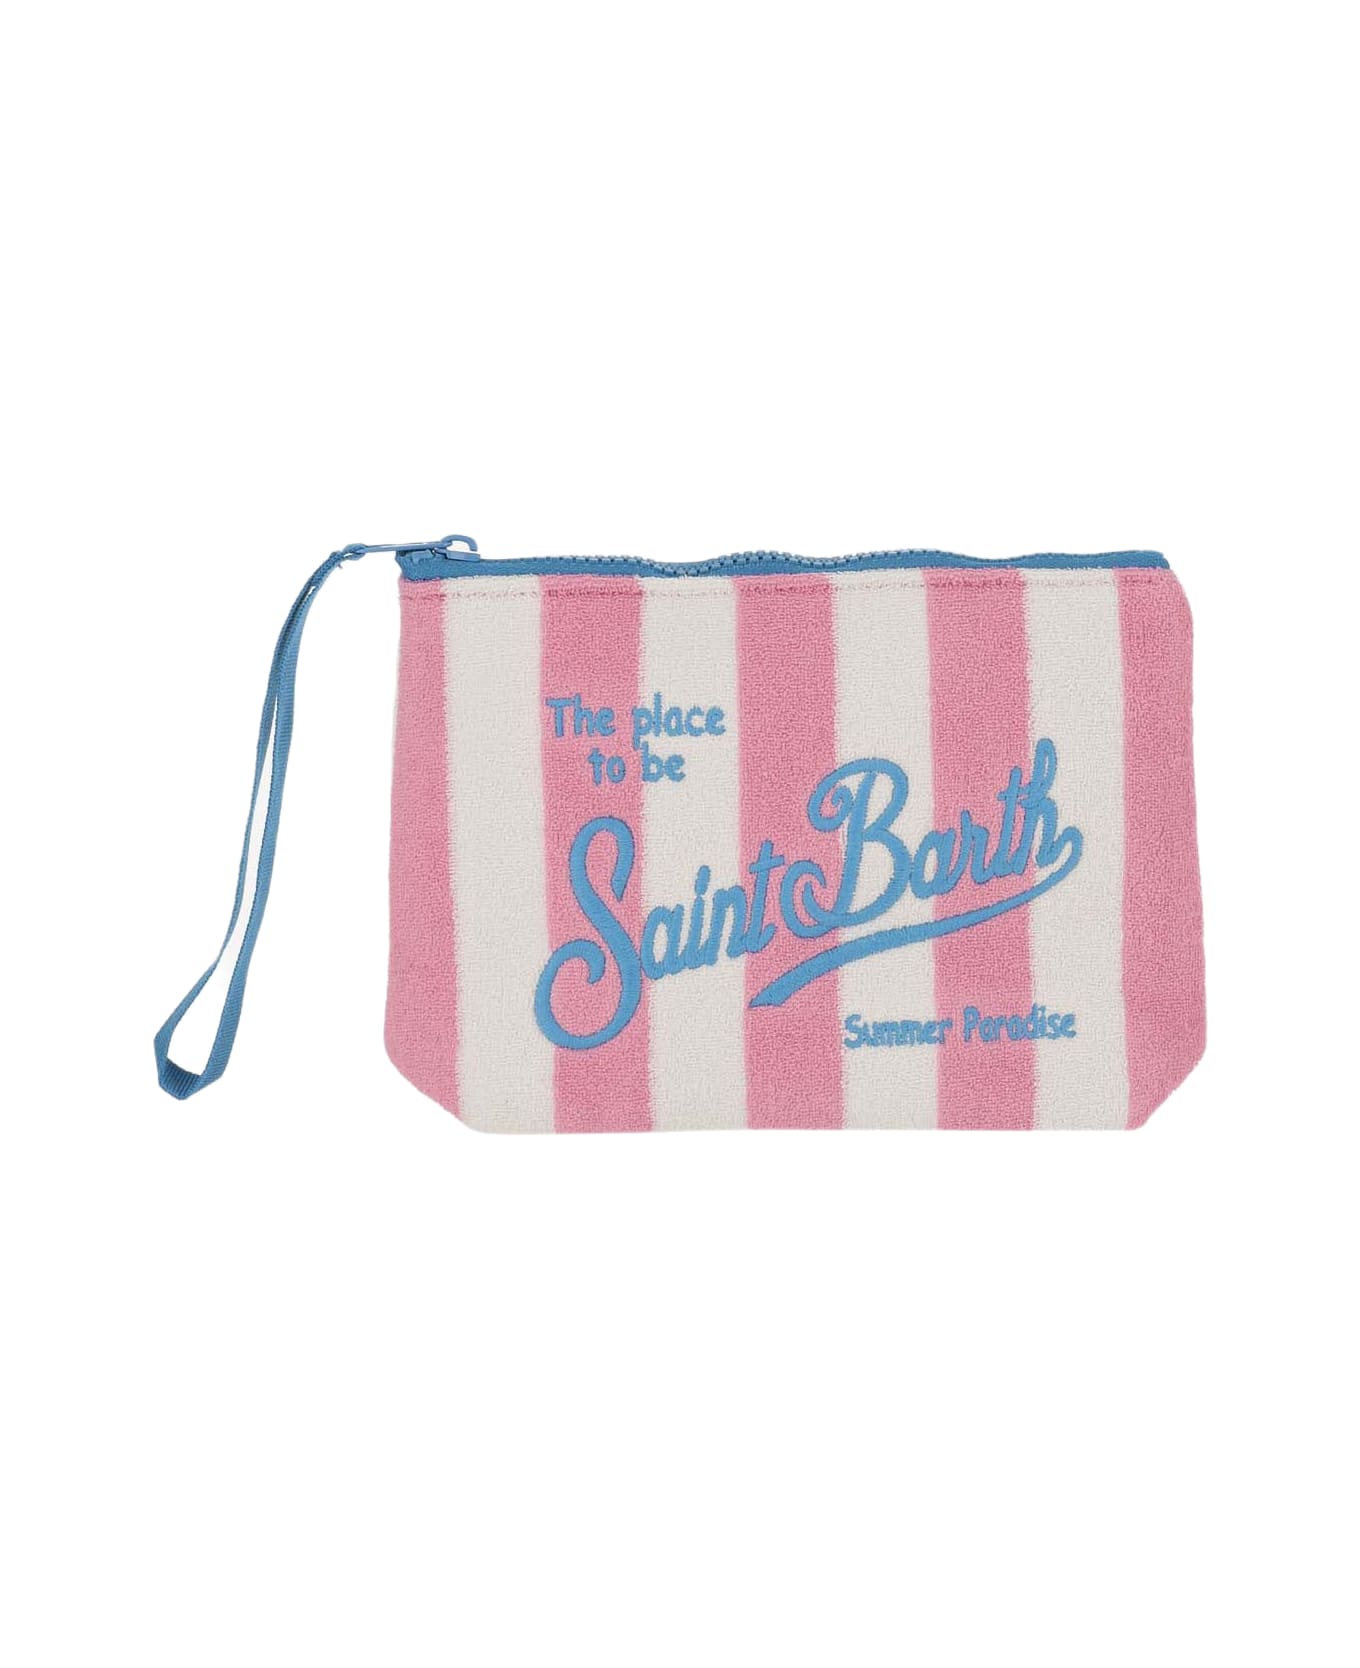 MC2 Saint Barth Fabric Clutch Bag With Striped Pattern - Red